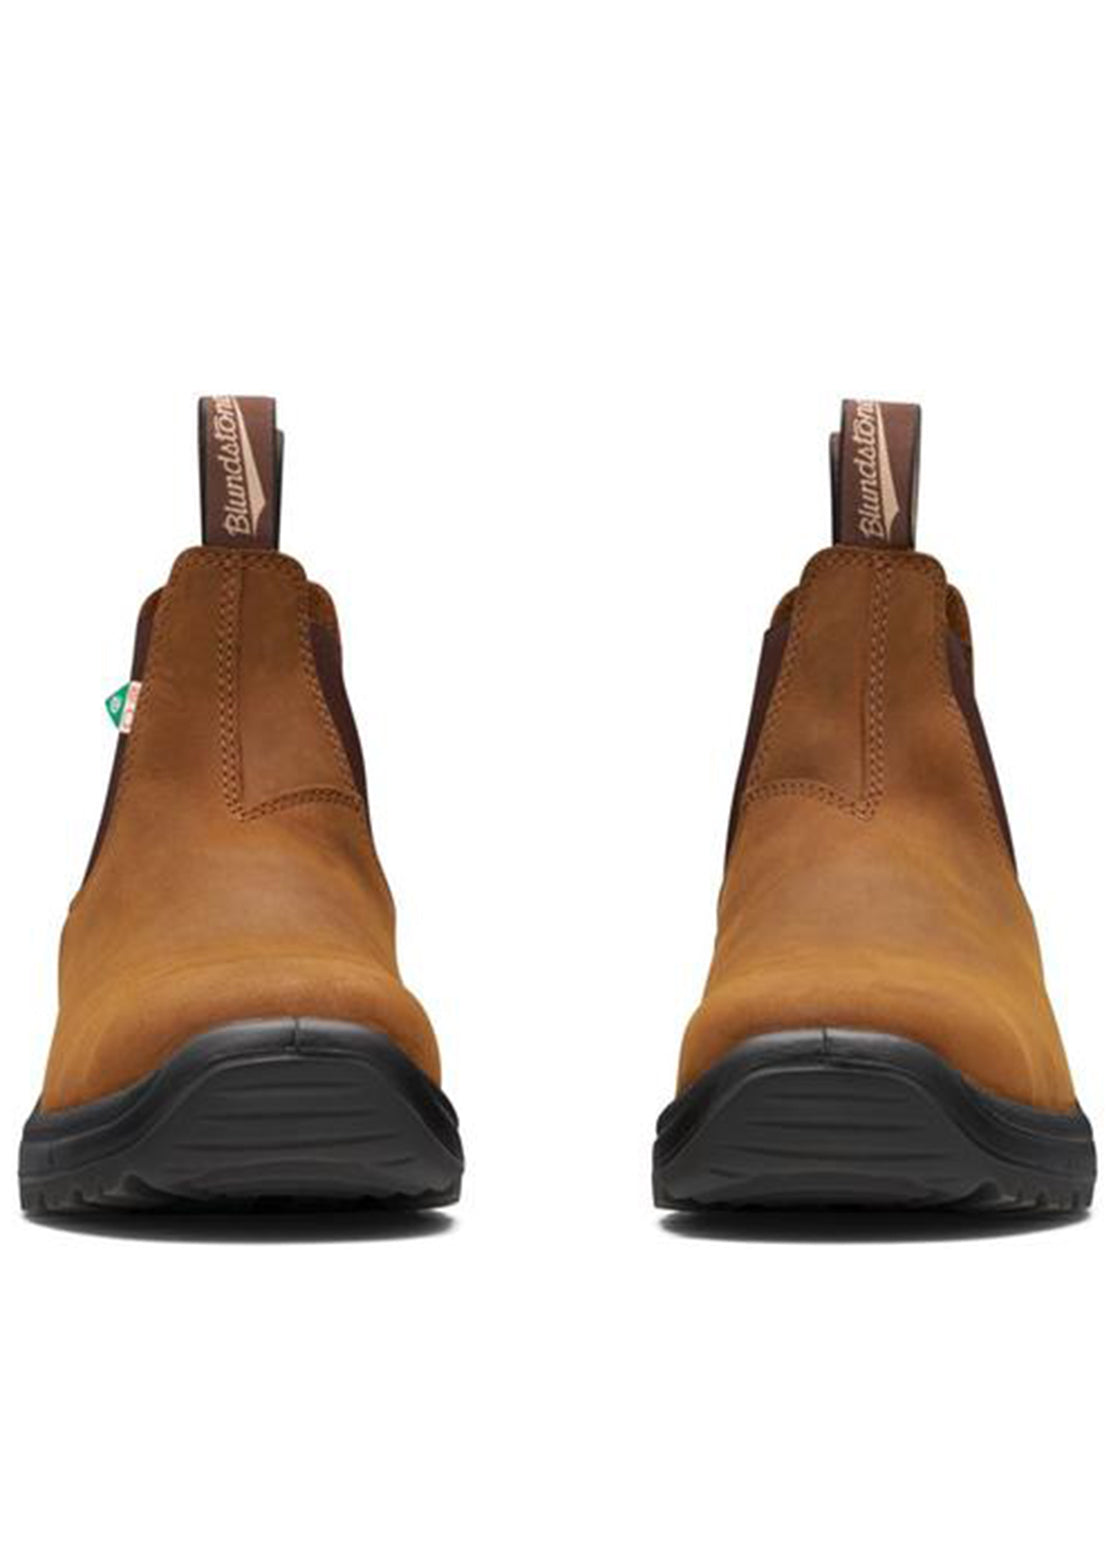 Blundstone 164 CSA Greenpatch Safety Boot Crazy Horse Brown